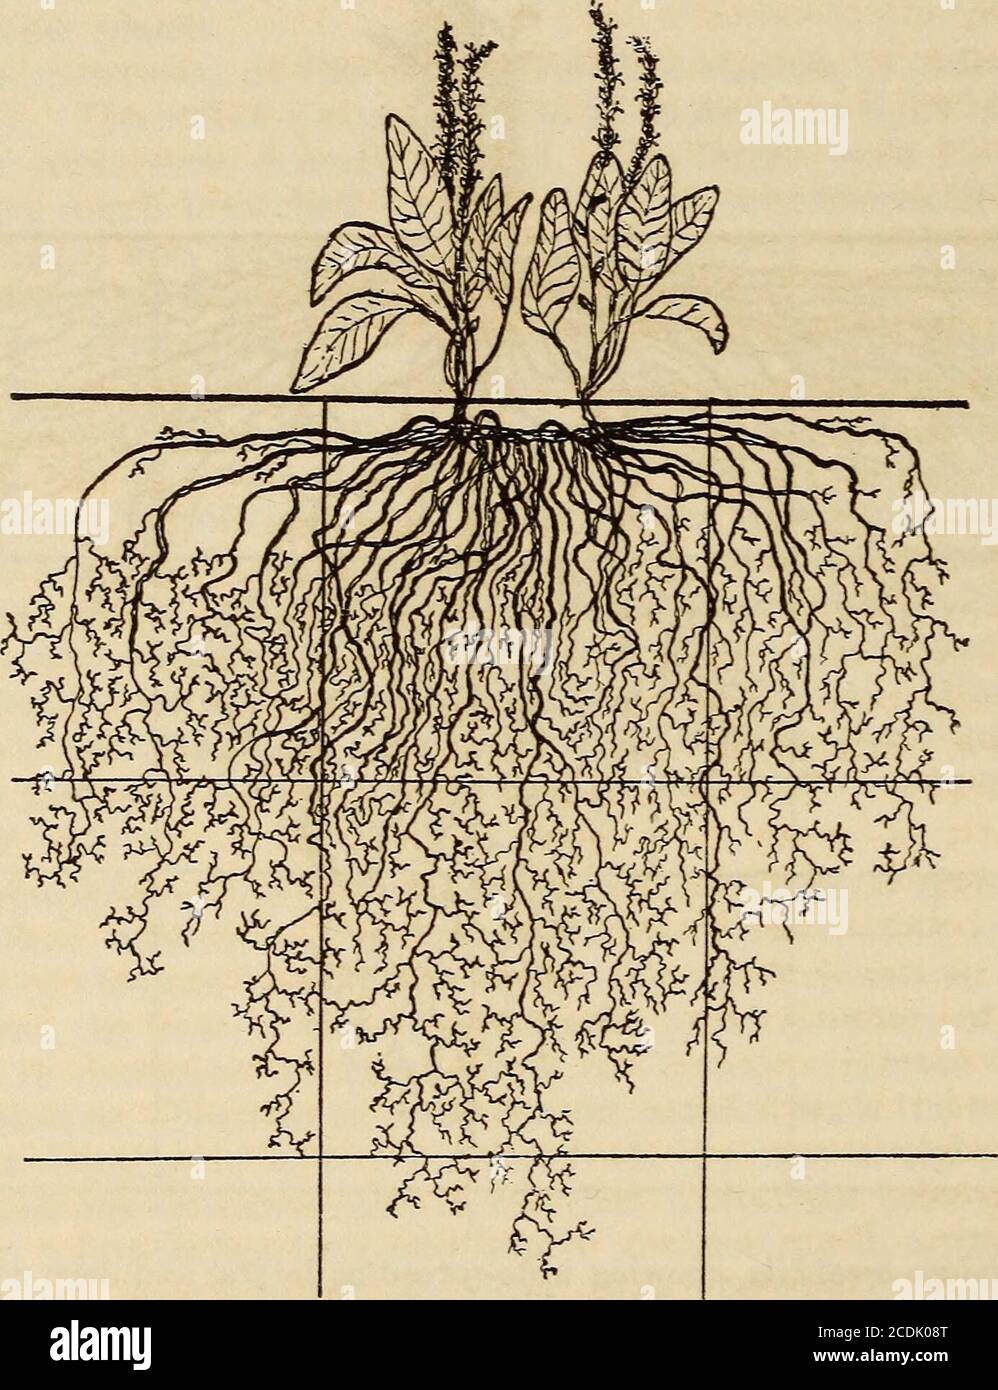 . The ecological relations of roots . f shorter, minutely branched,often vertically descending rootlets. Thus the plant is provided with an 94 THE ECOLOGICAL RELATIONS OF ROOTS. effective absorbing system, which ramifies widely and fills the soil from adepth of from 4 to 36 inches. The whole root system is characteristic of thehalf-gravel-sHde root habit. Besseya plantaginea.âThis plant frequently grows in clusters of 3 or more,the individuals of which are connected by short rhizomes about 5 mm. or lessin diameter and 2 or 3 inches long. The base of the plant and these rhizomesare densely cove Stock Photo